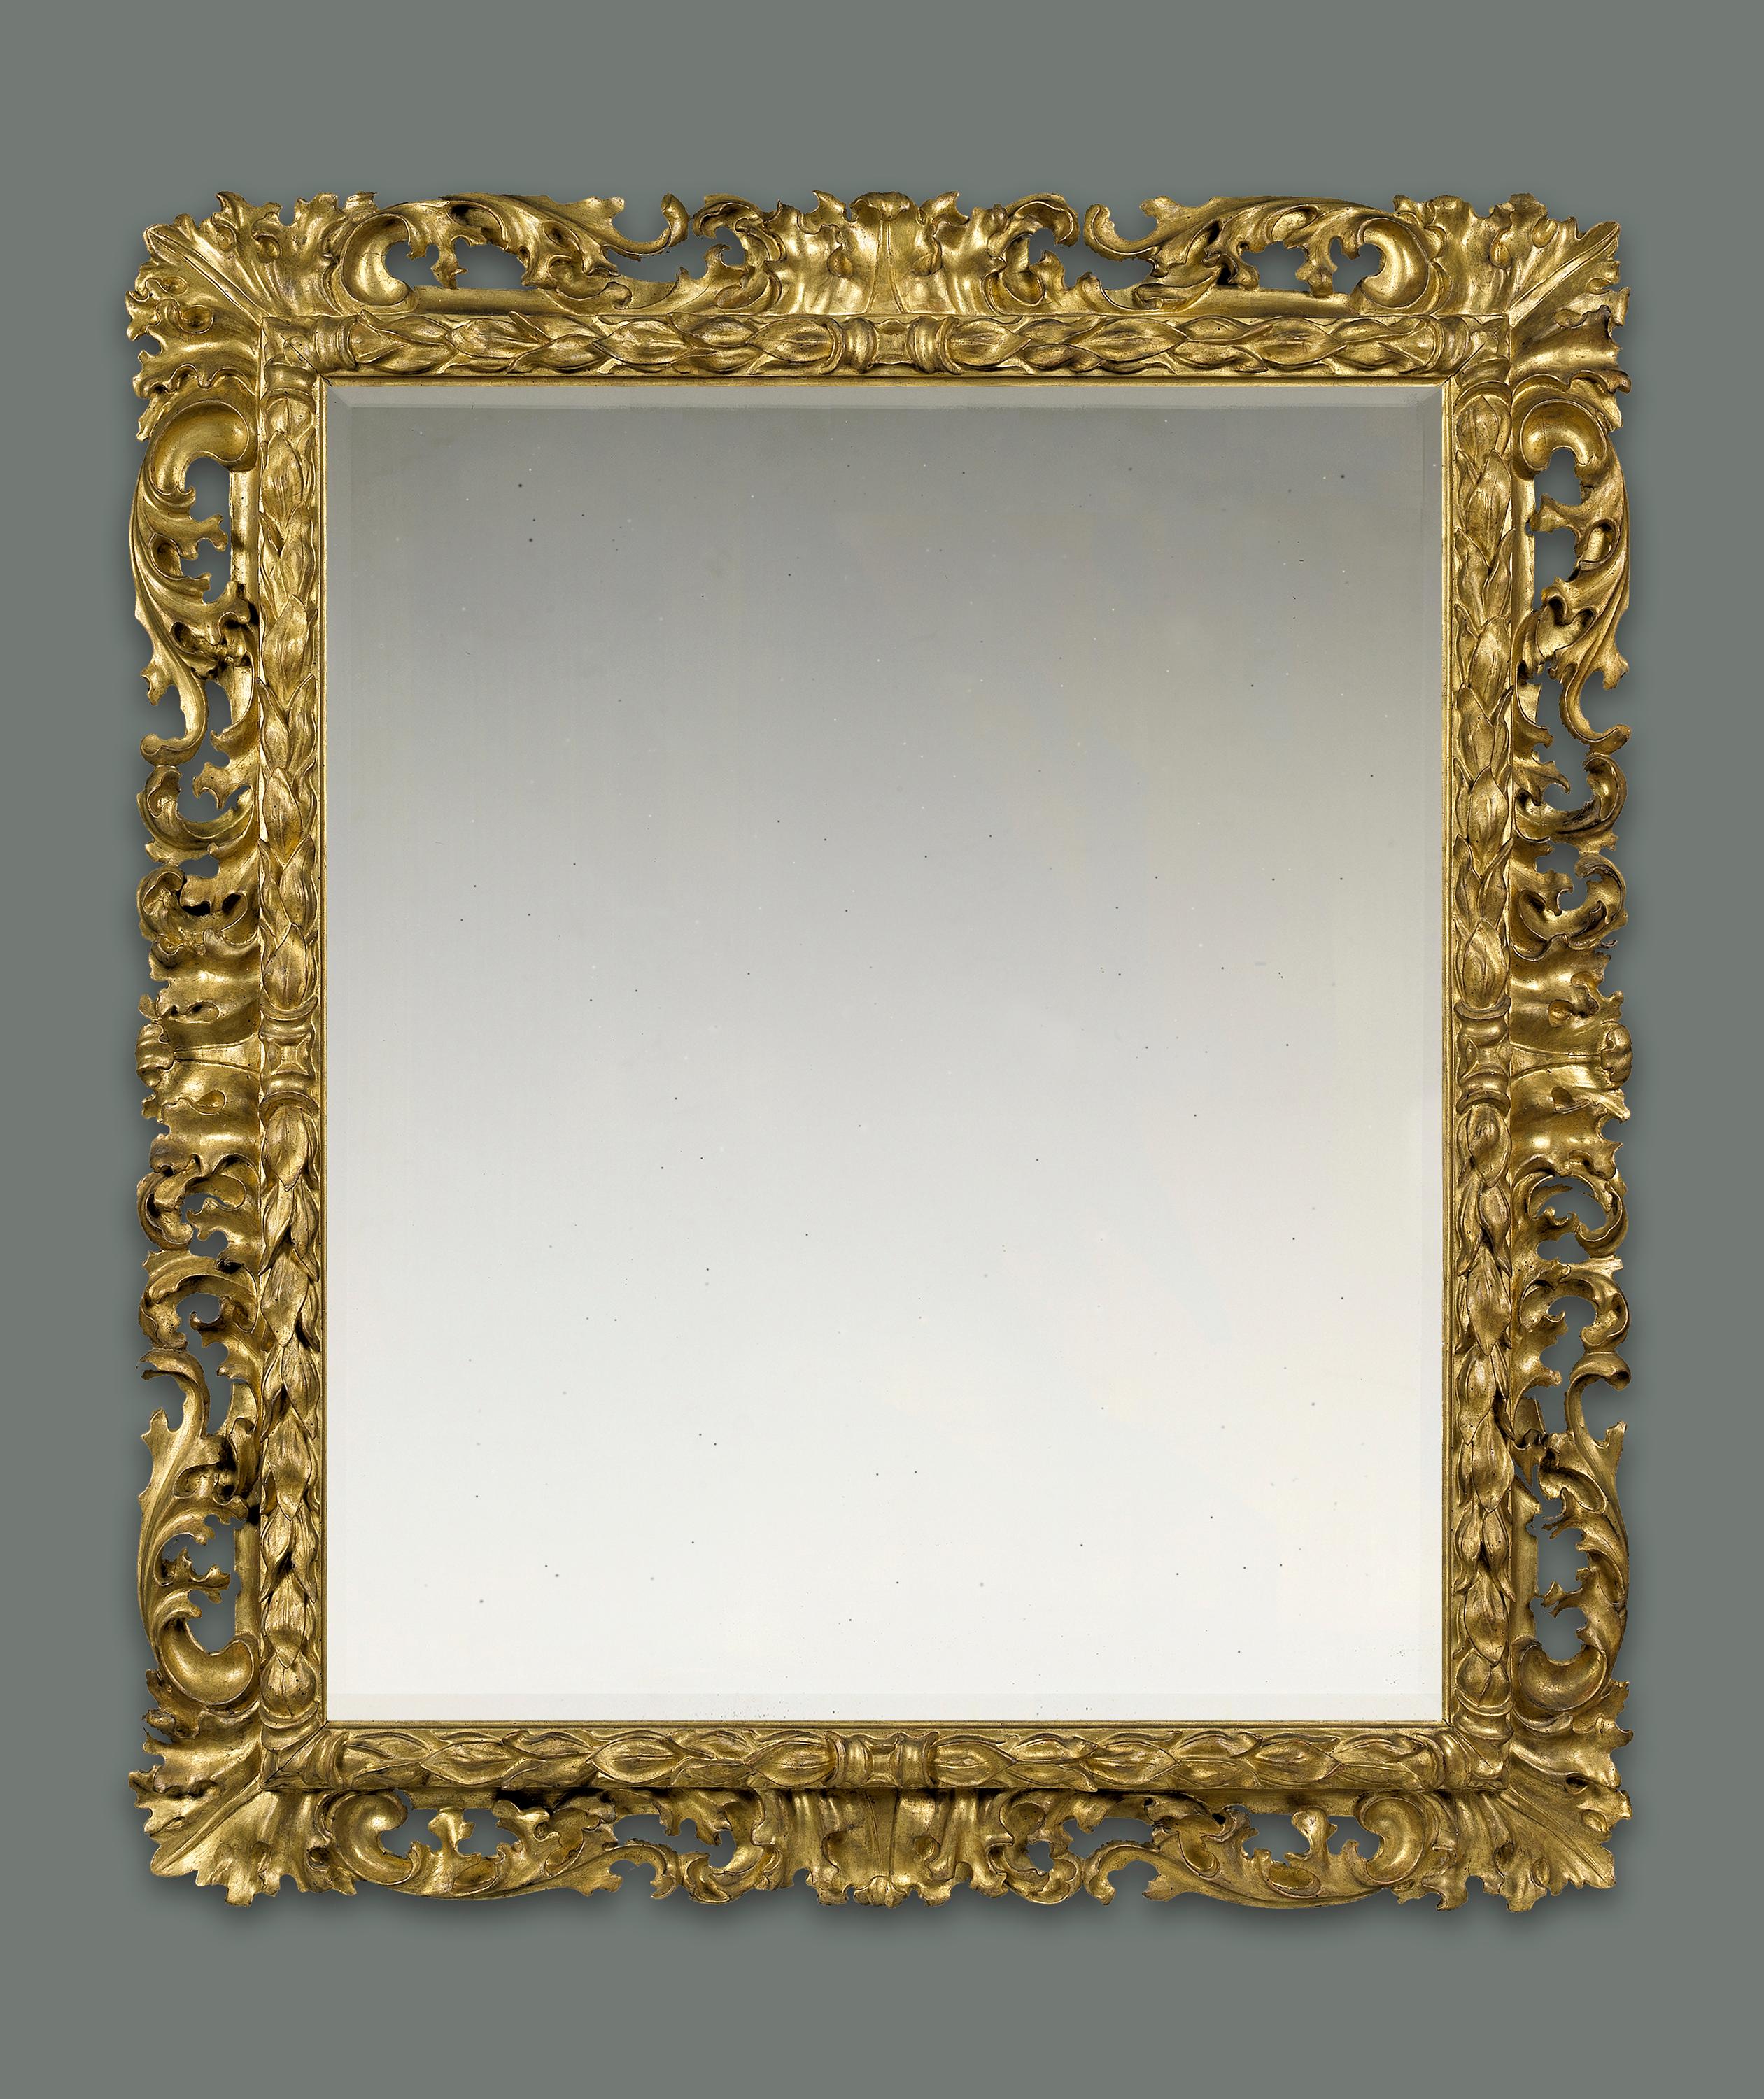 Mid-17th Century Carved Italian Baroque Frame, with Choice of Mirror (Barock) im Angebot